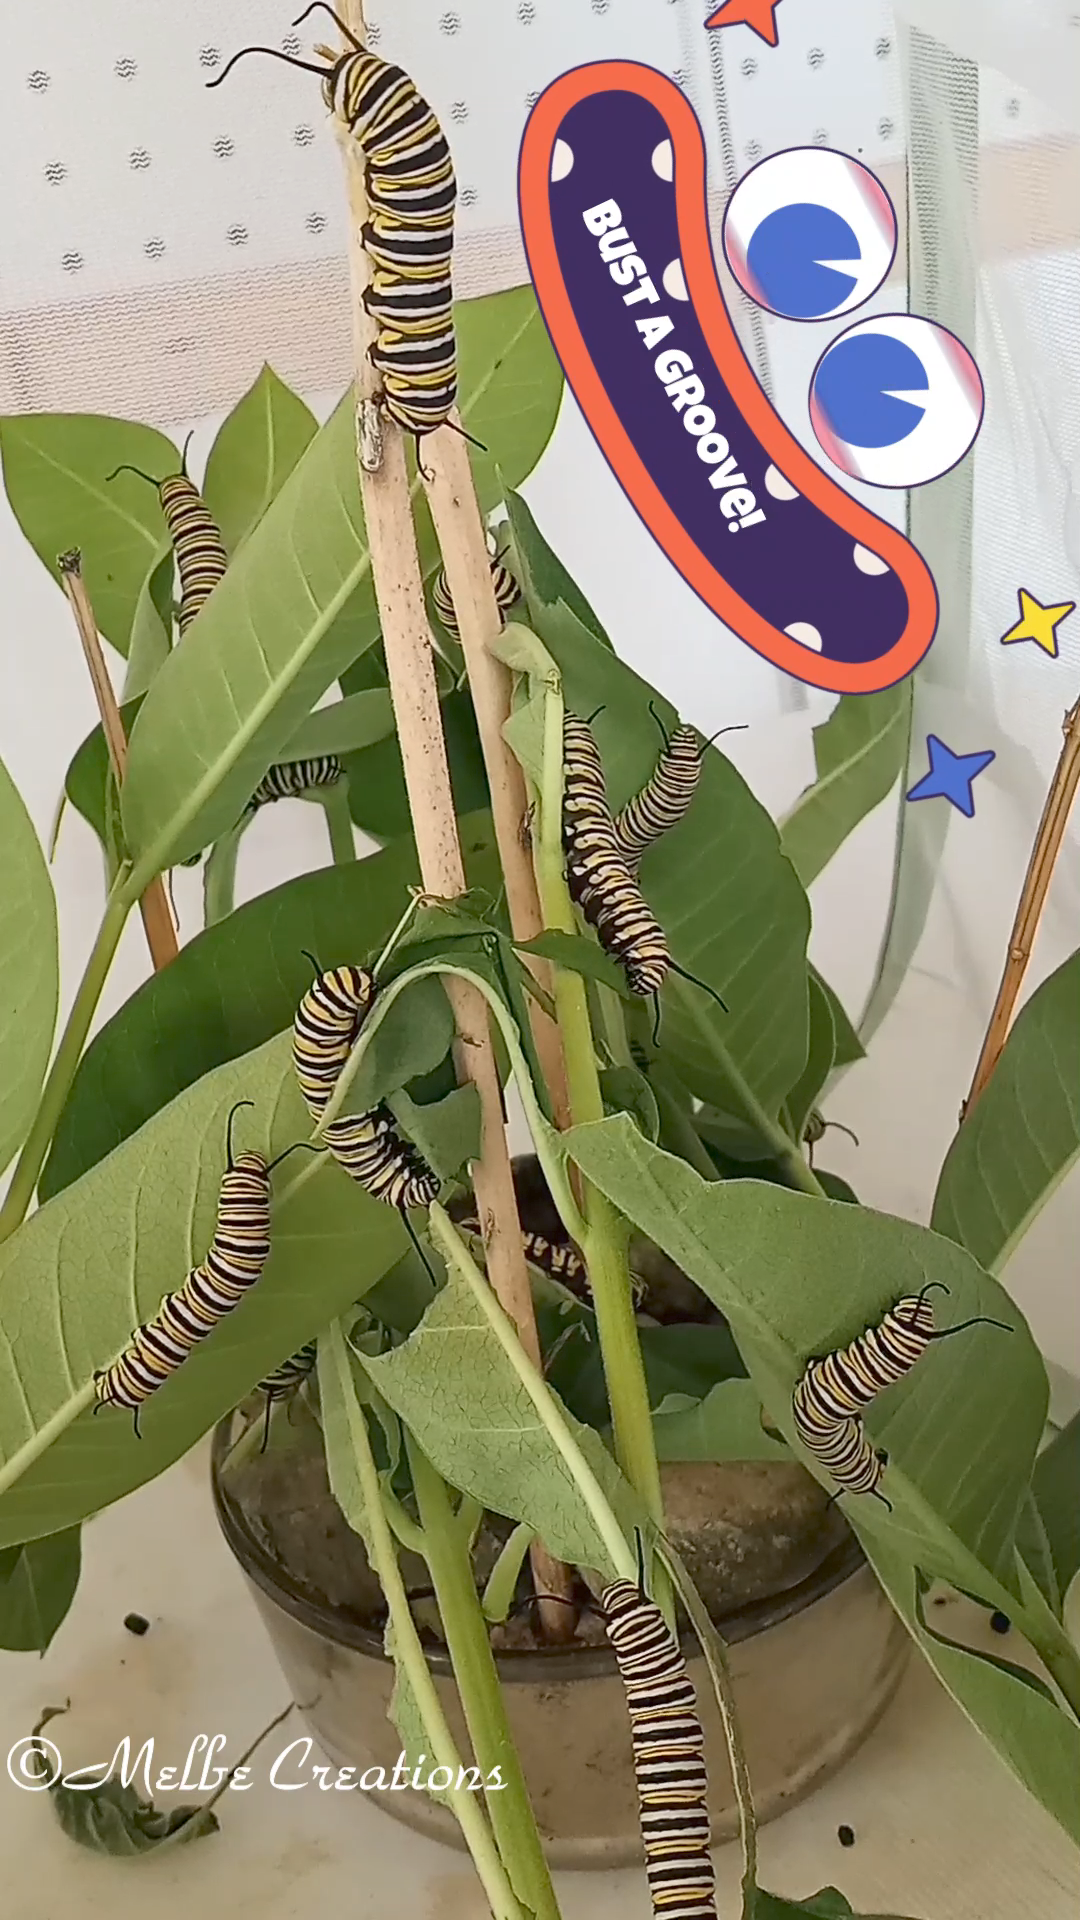 Caterpillars Busting A Groove